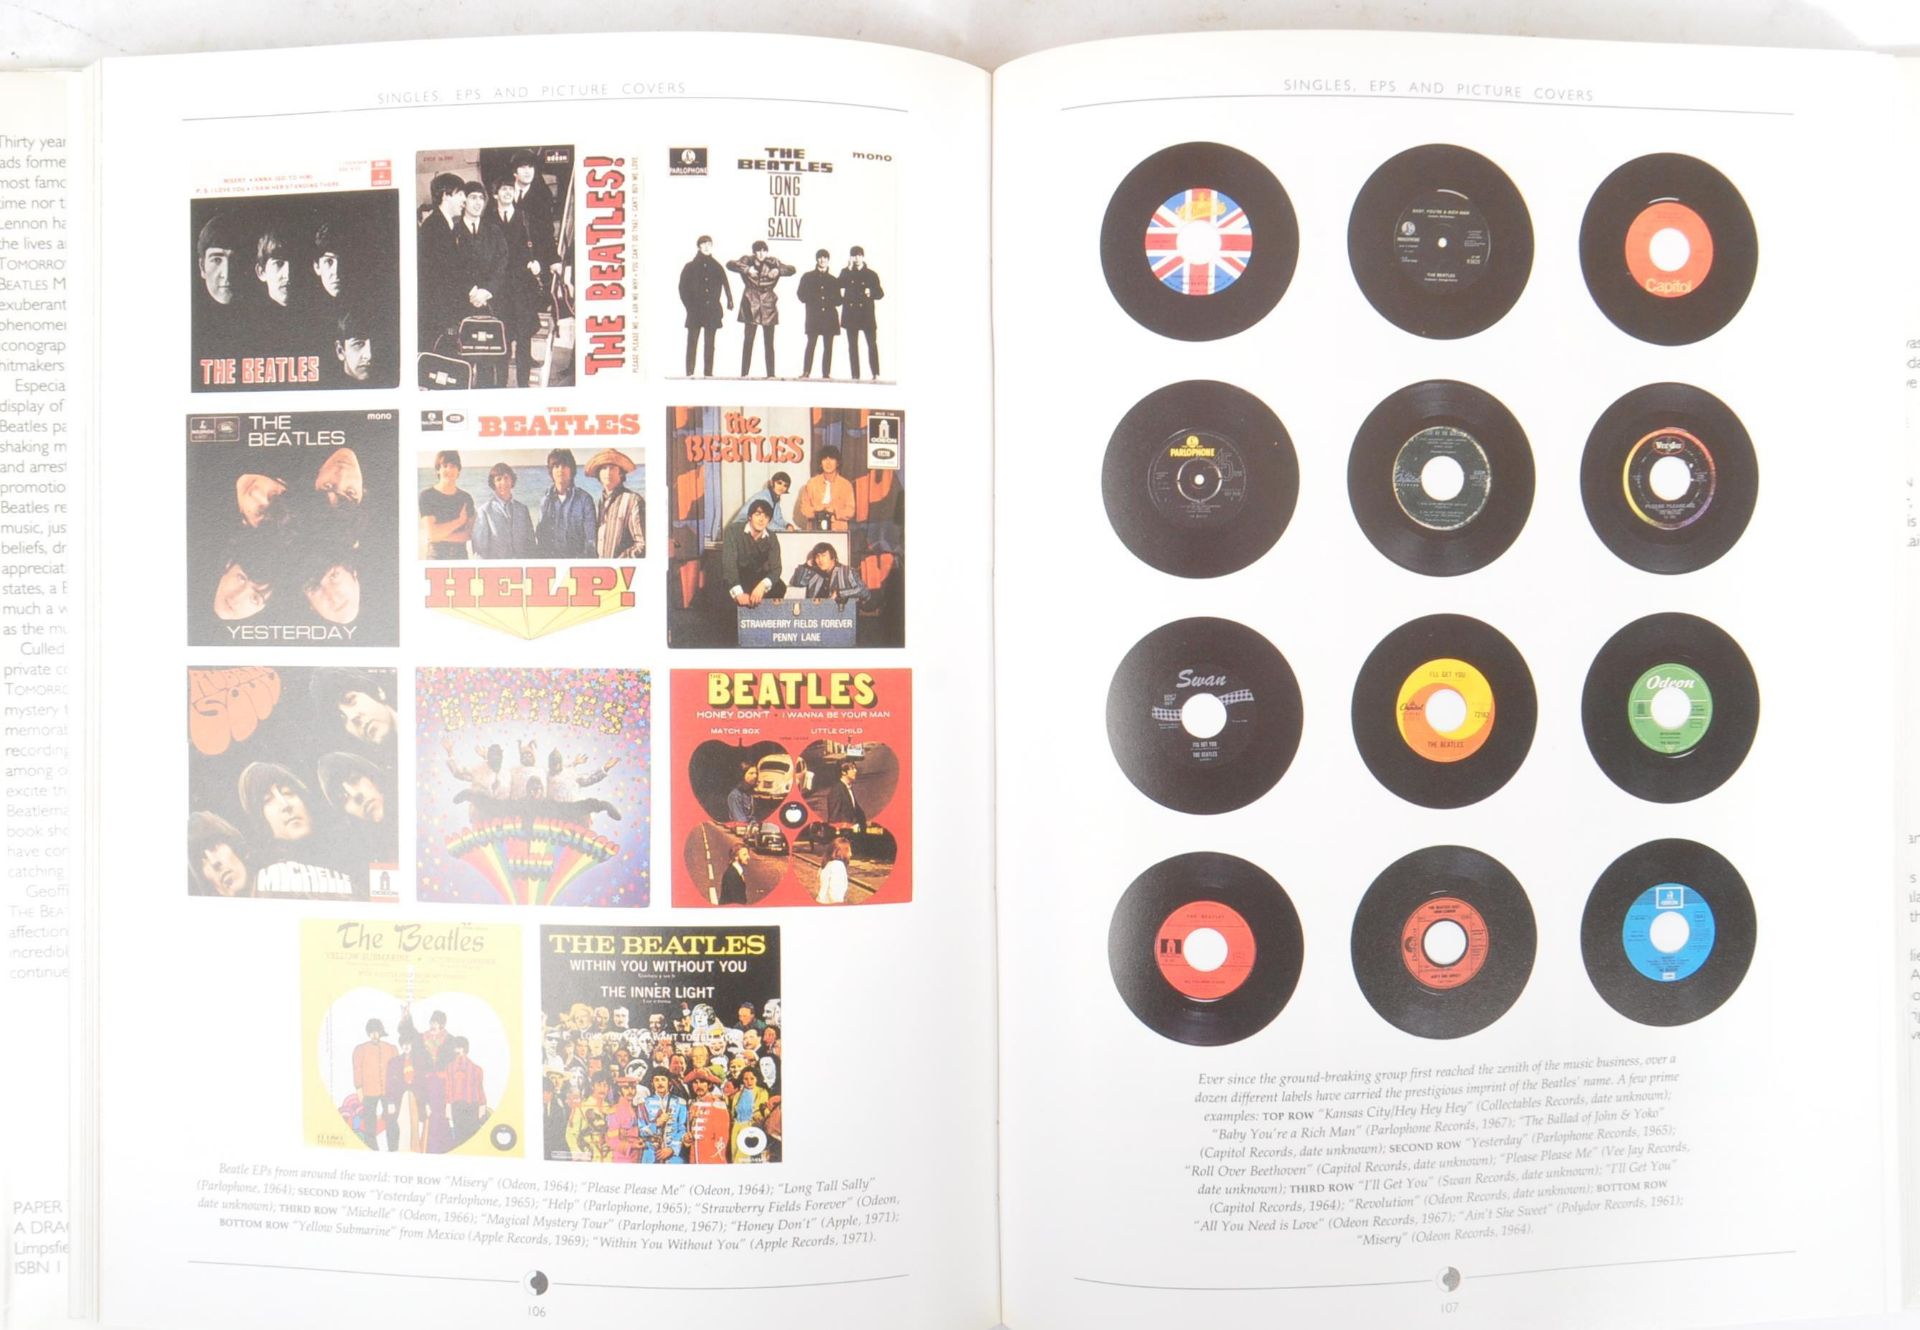 THE BEATLES - COLLECTION OF VINTAGE EPHEMERA & PUBLICATIONS - Image 5 of 6